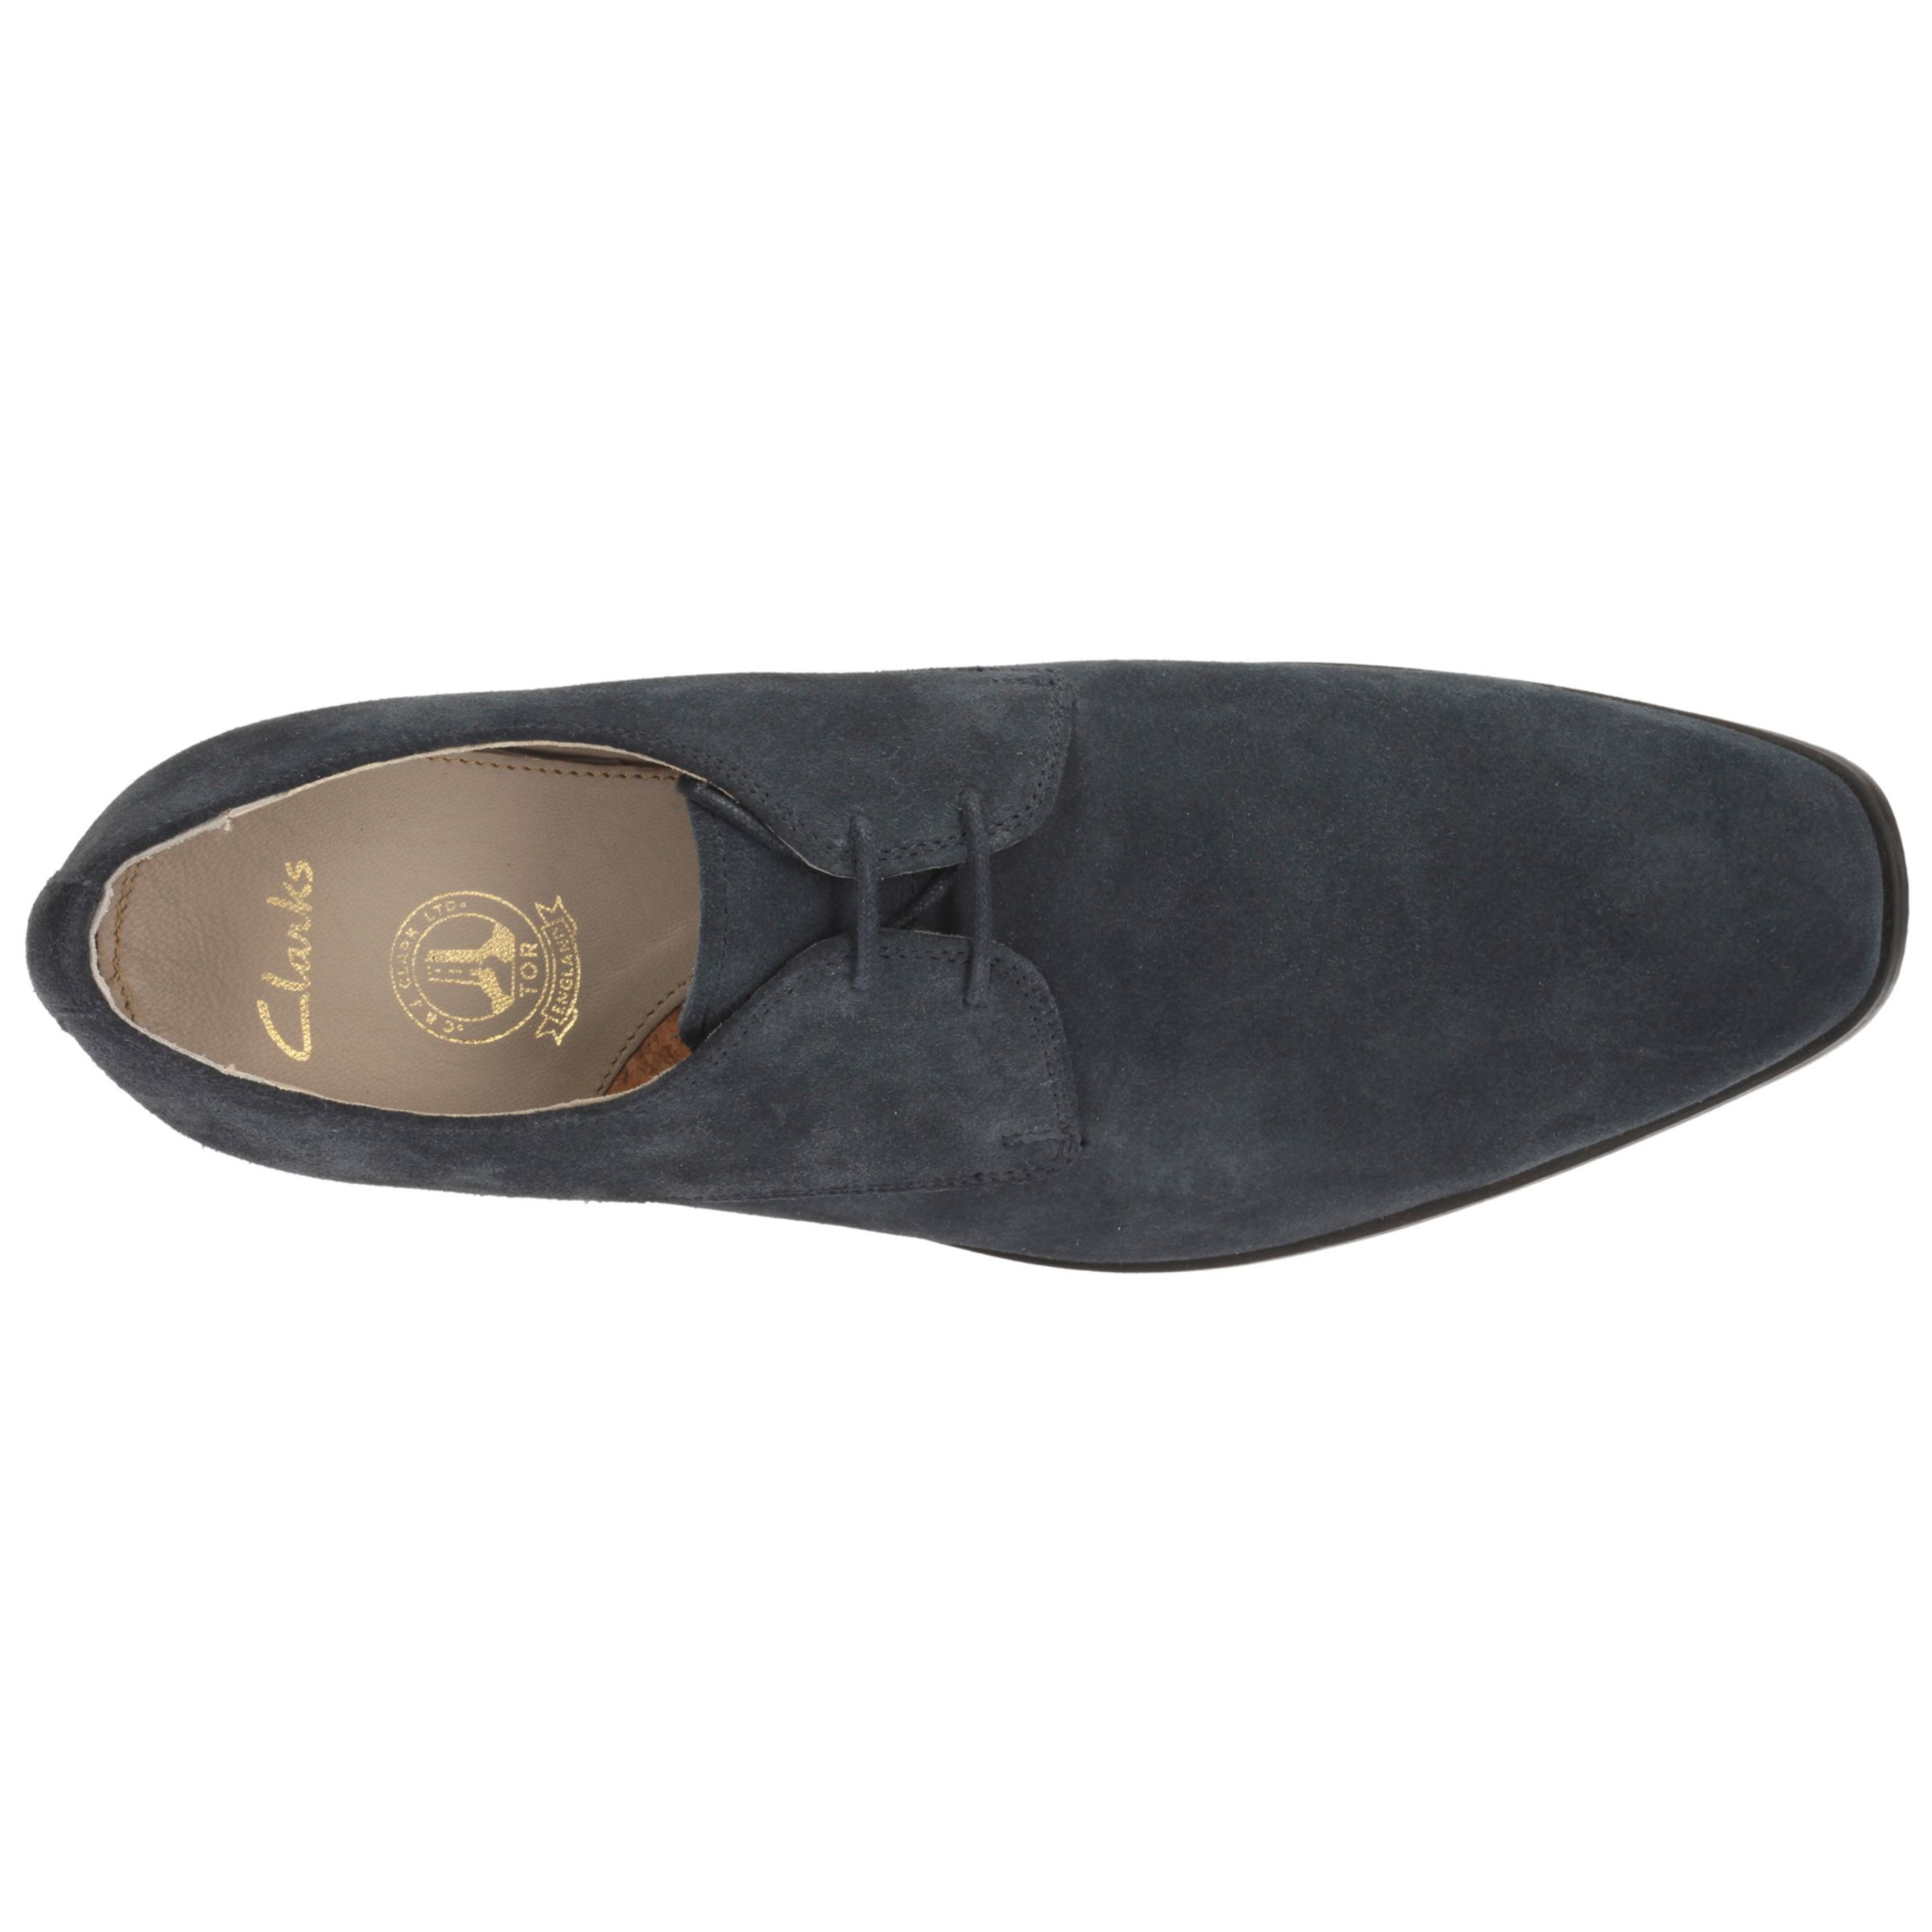 clarks navy dress shoes